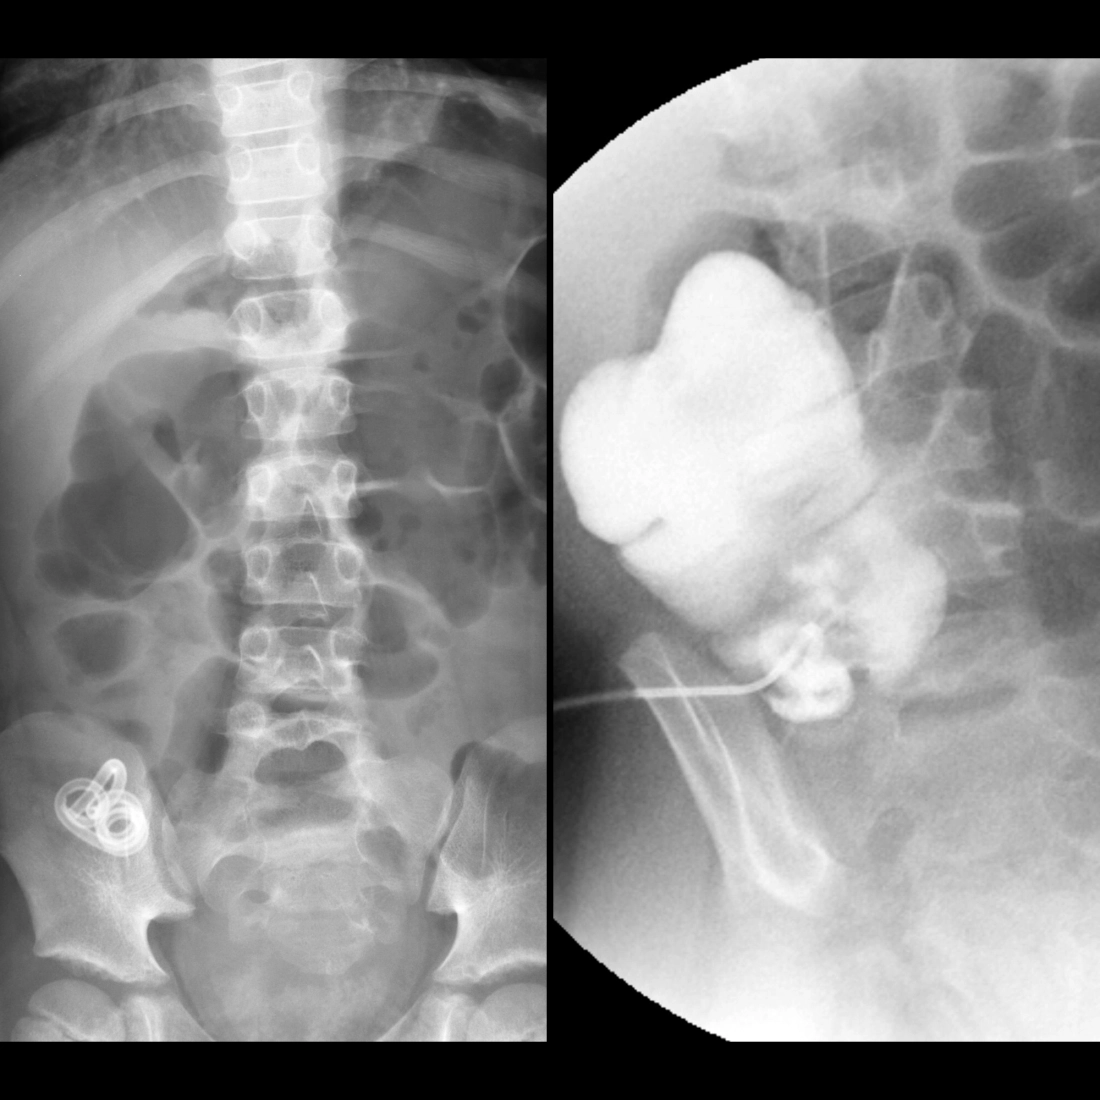 Cecostomy tube injection showing cecostomy tube in the correct position in the cecum